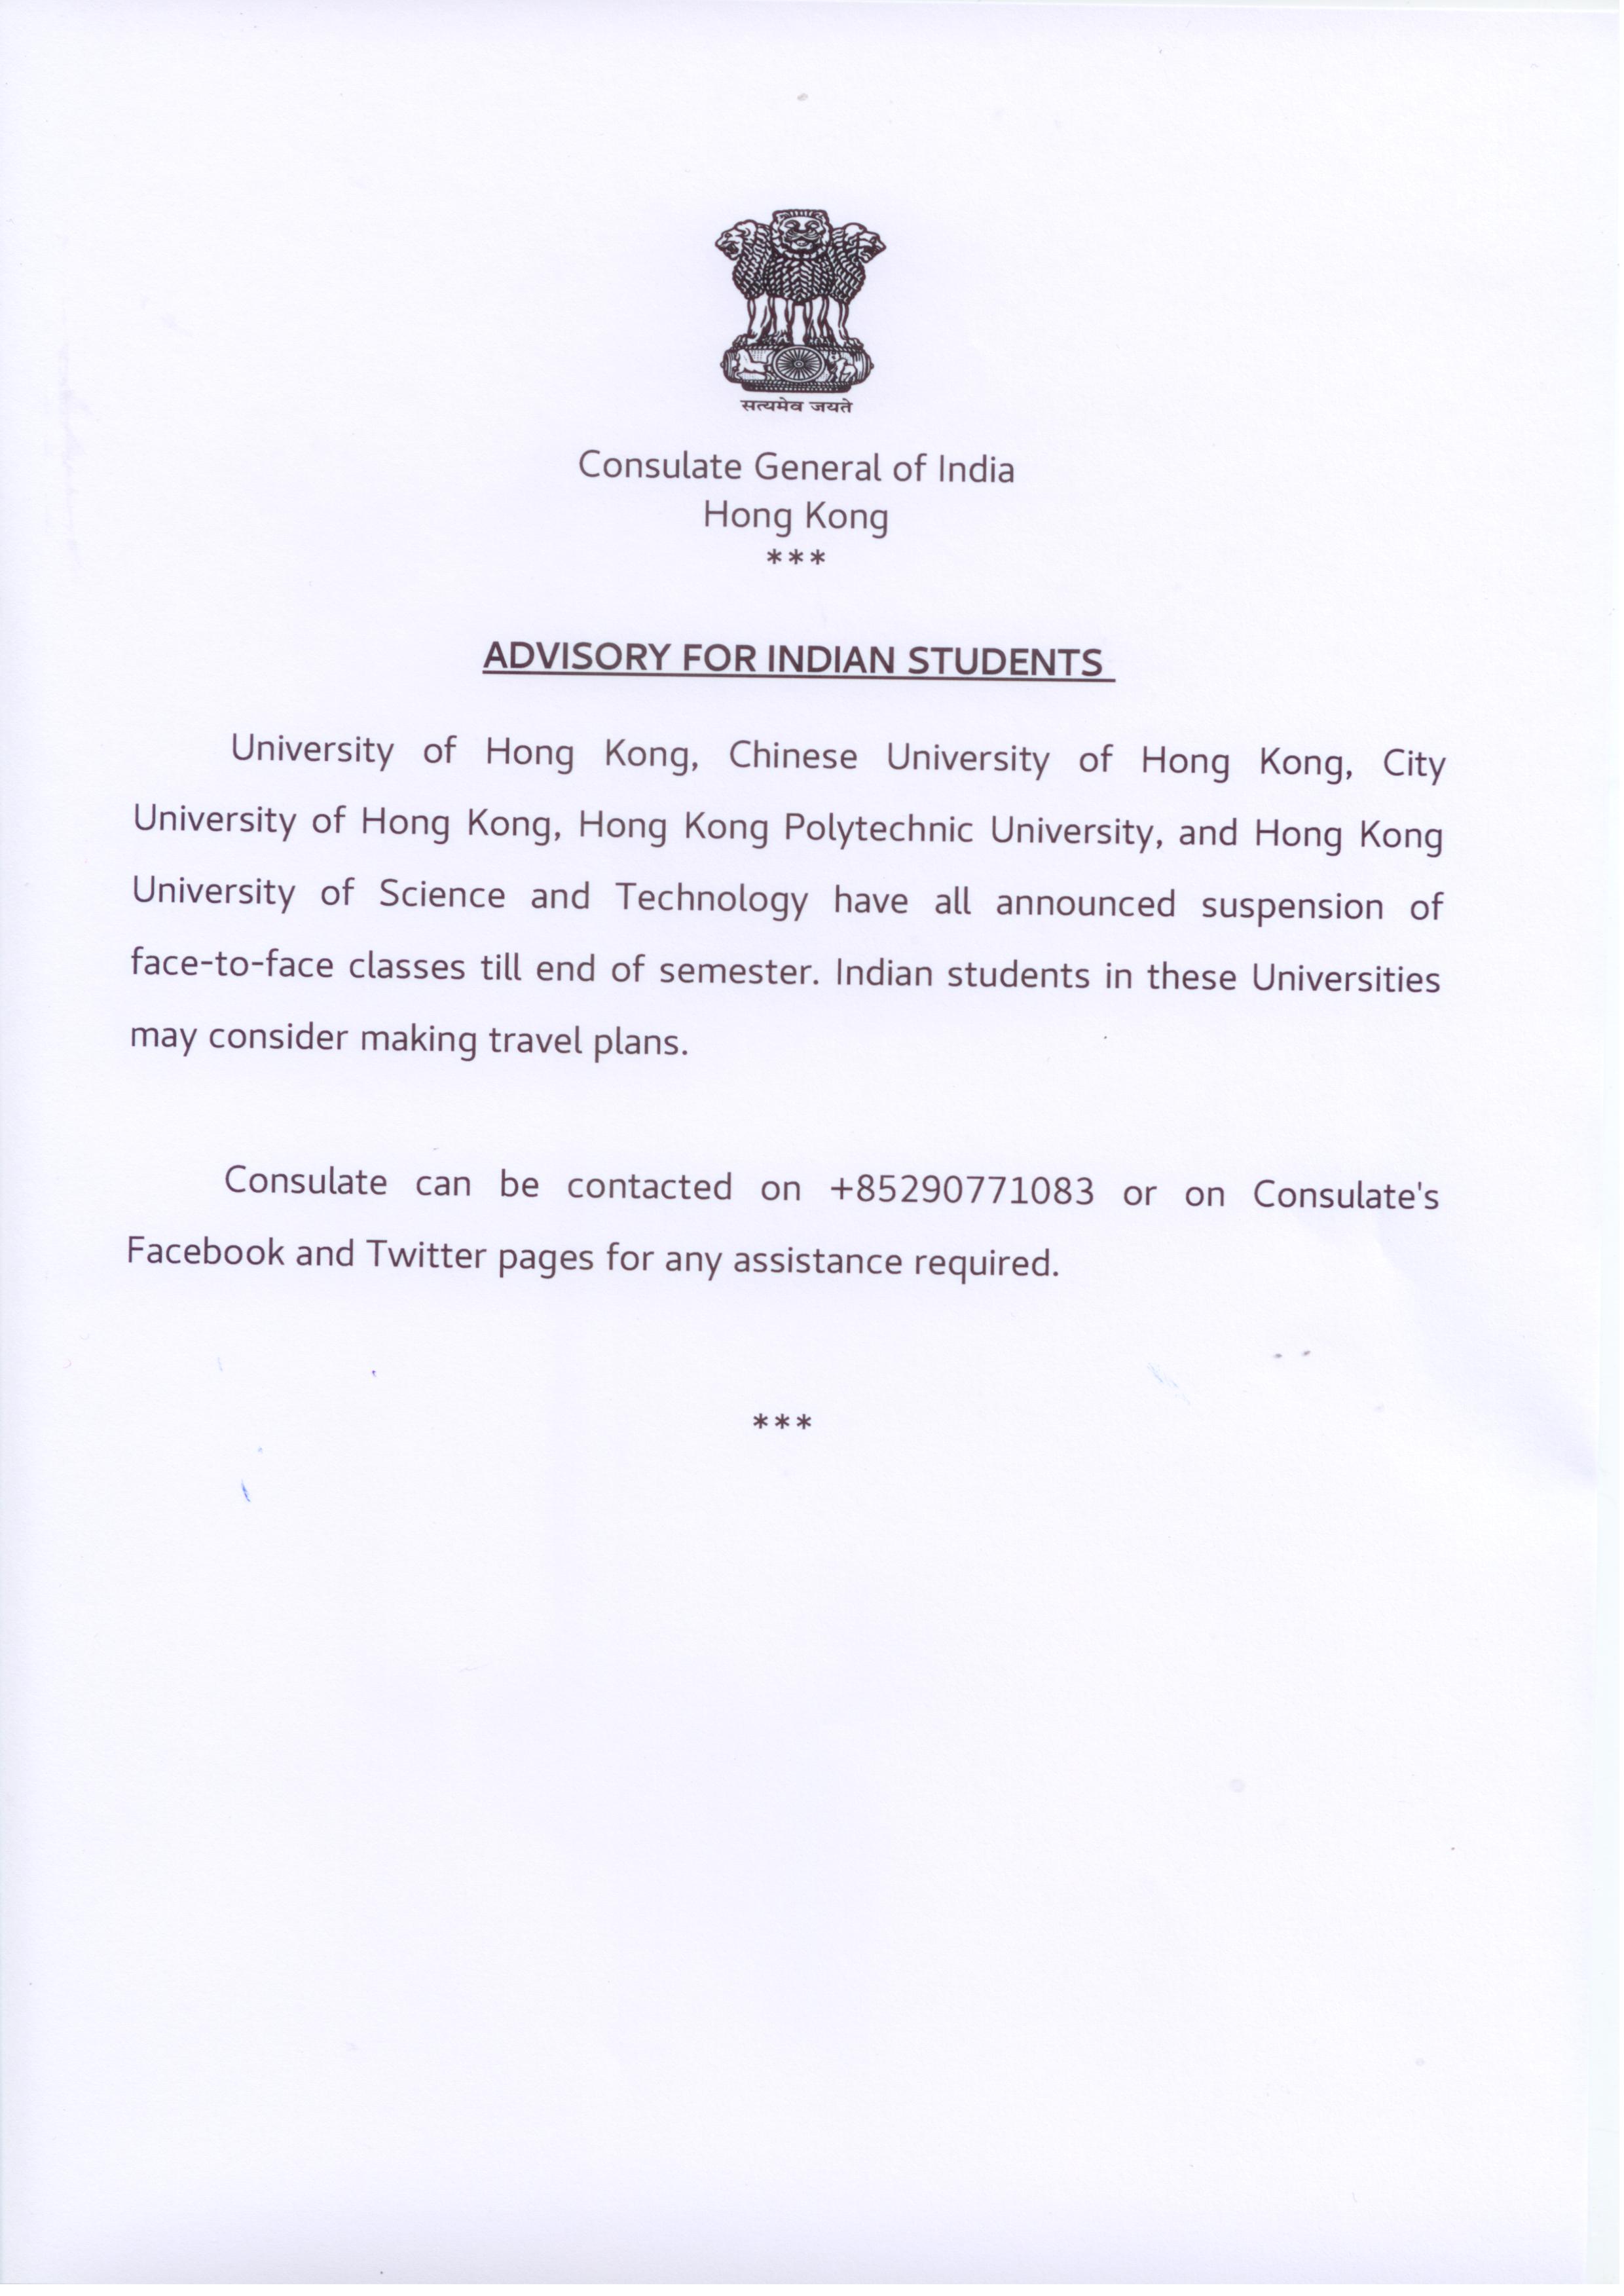 Advisory for Indian Students